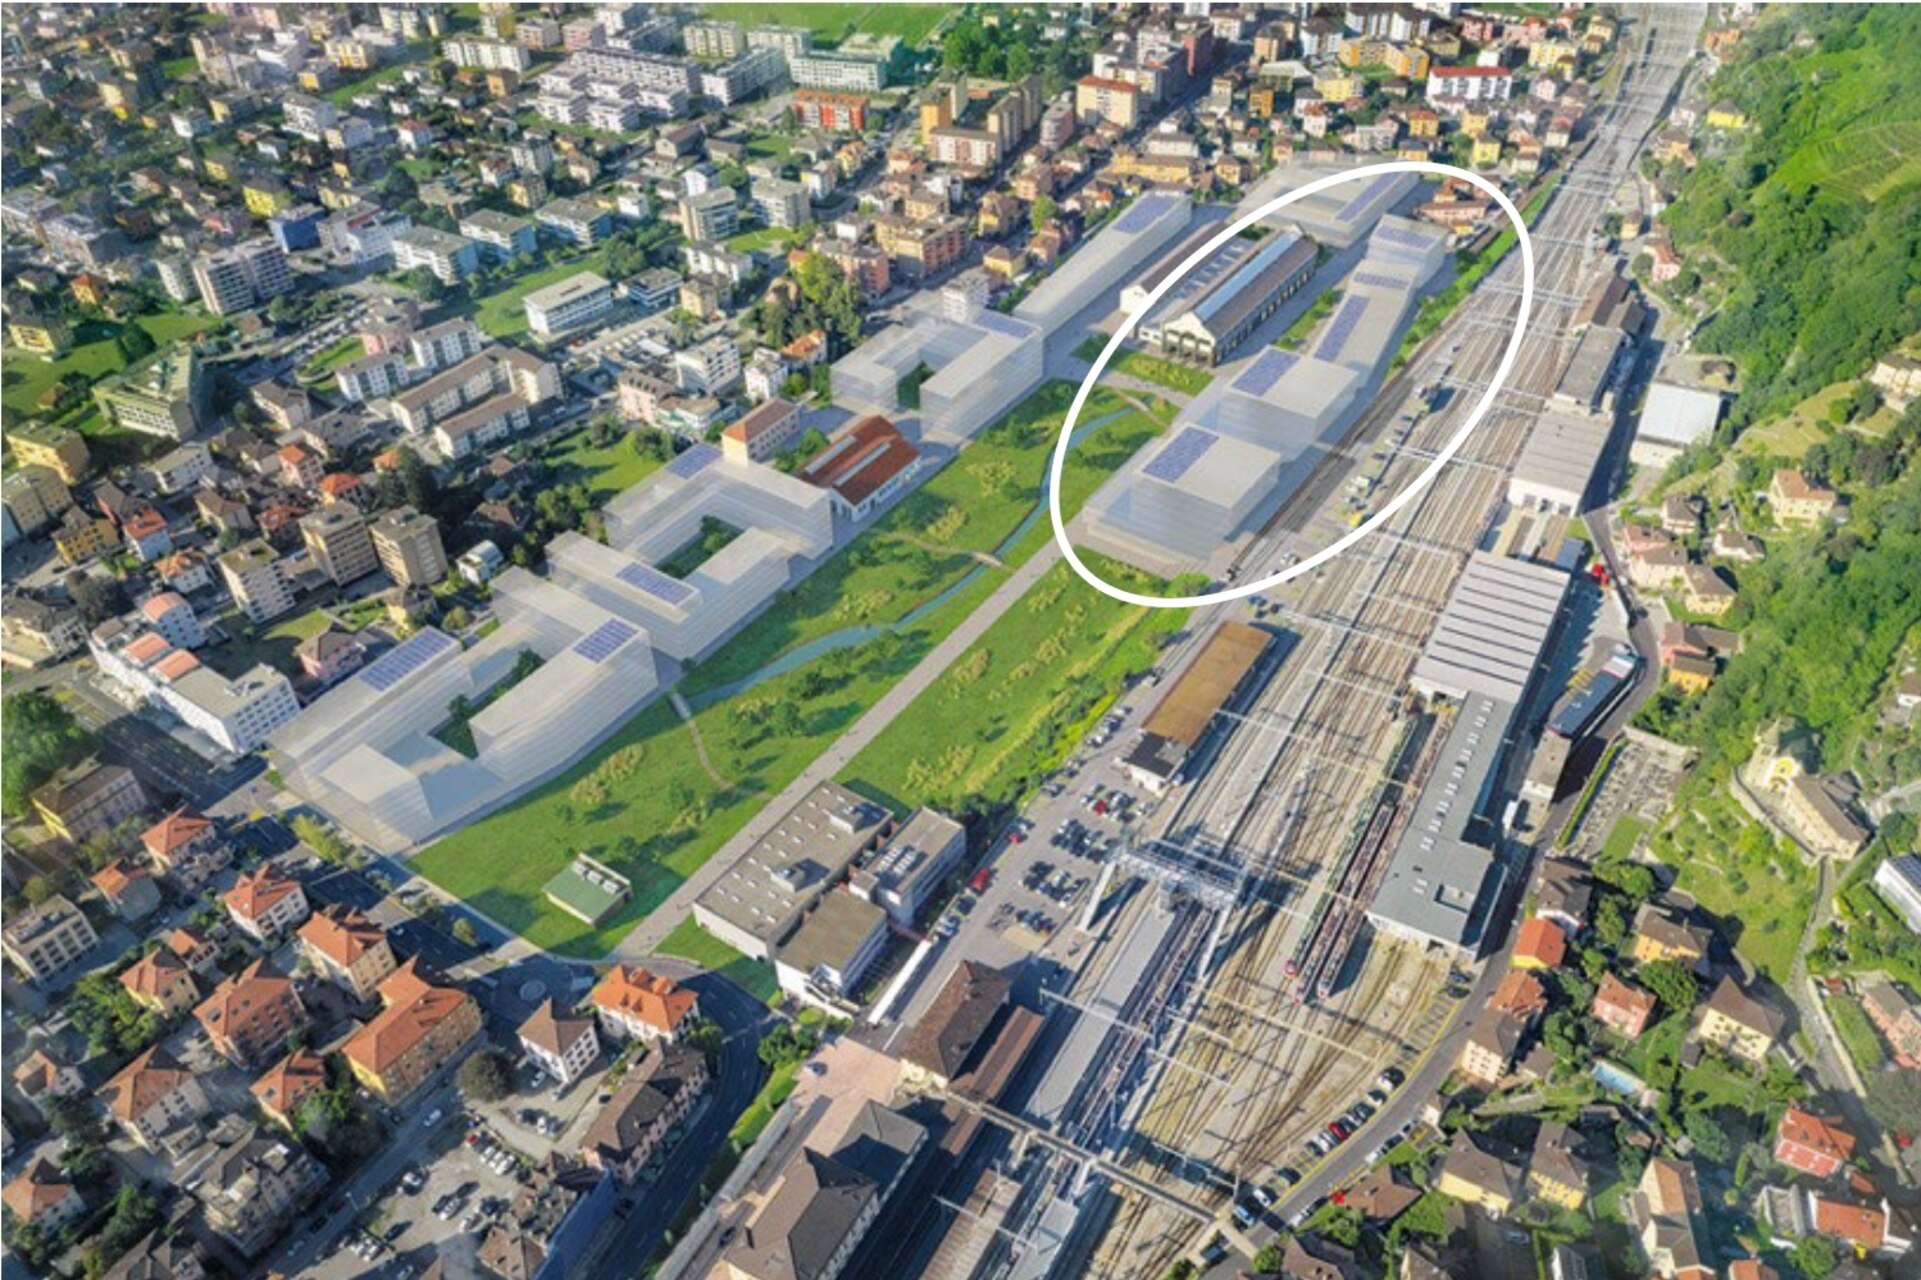 Life sciences: the evolution of the Nuove Officine district of Bellinzona, which will be ready in 2027 with an investment of 120 million Swiss francs on an area of ​​25.000 square meters (total area 120.000) and will host the new center of excellence for life sciences